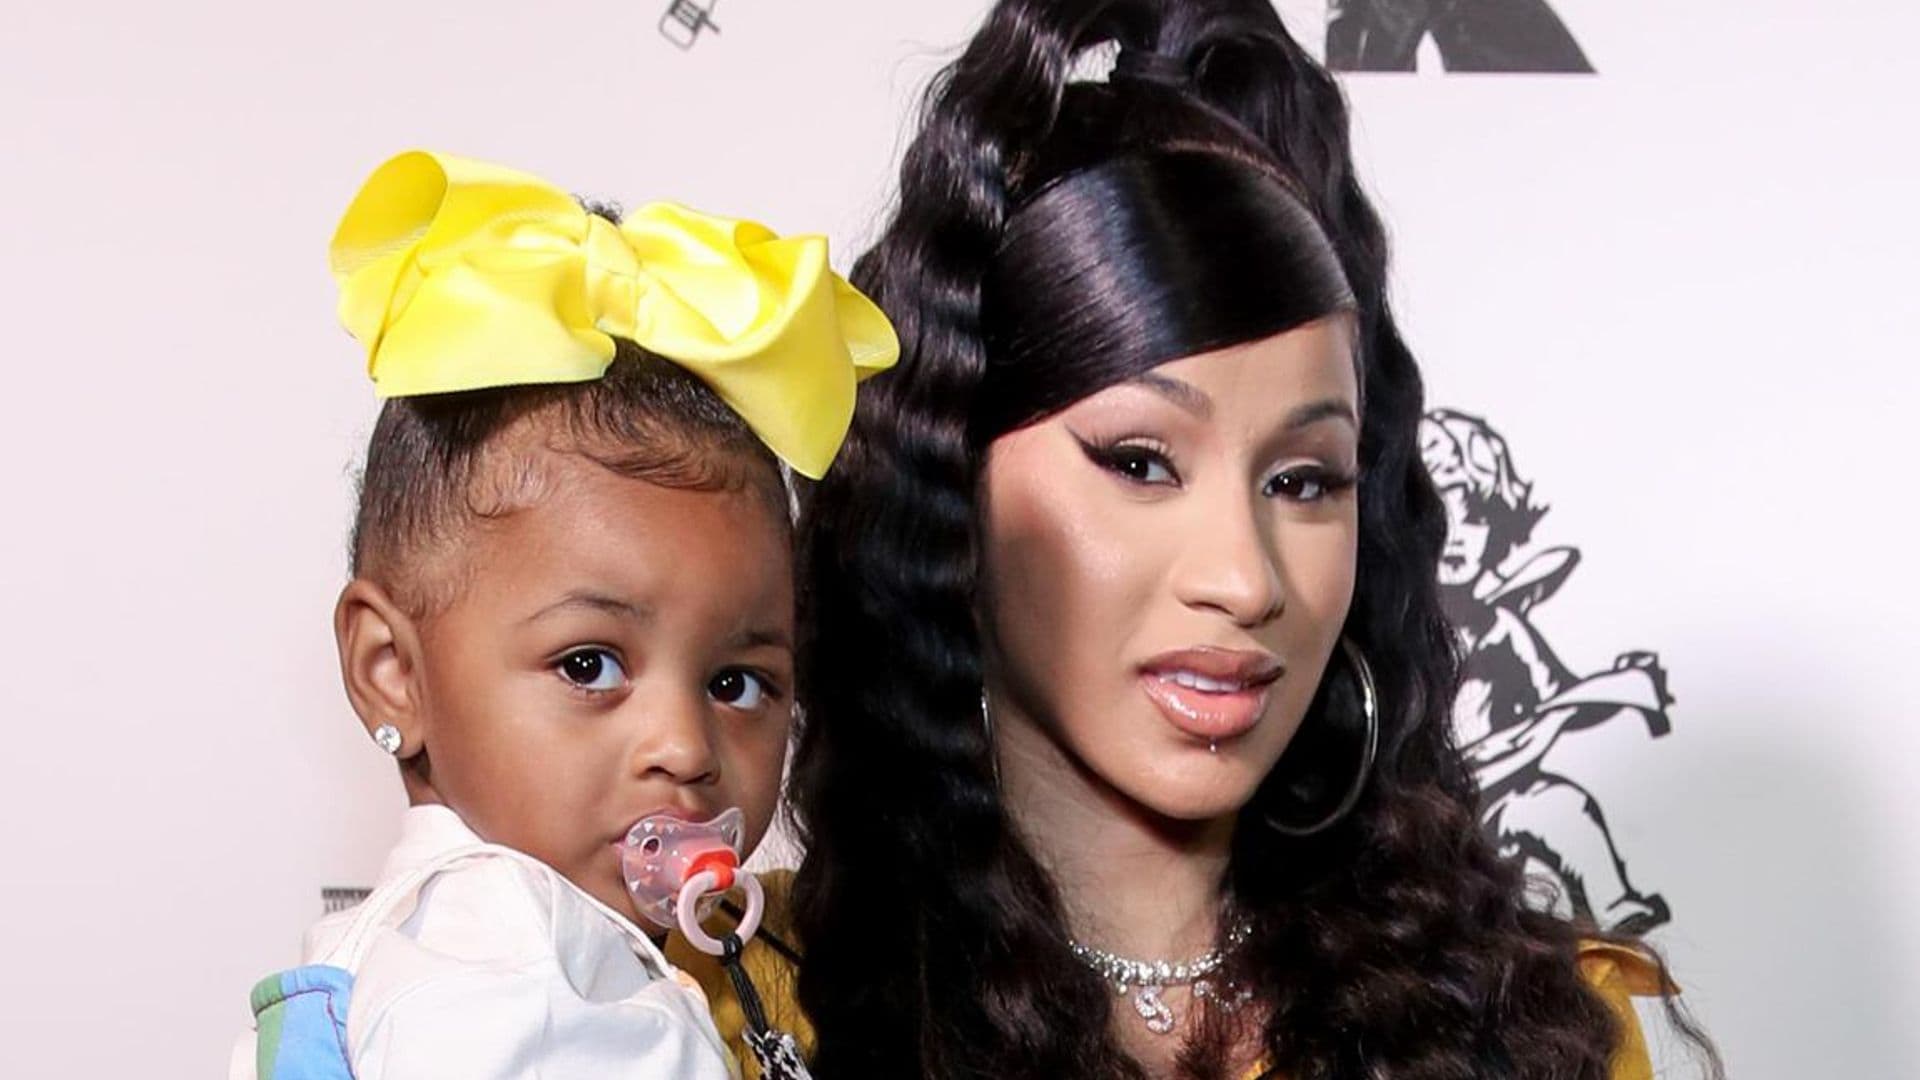 Cardi B defends 2-year-old daughter Kulture's Birkin bag 'She's gonna match mommy'